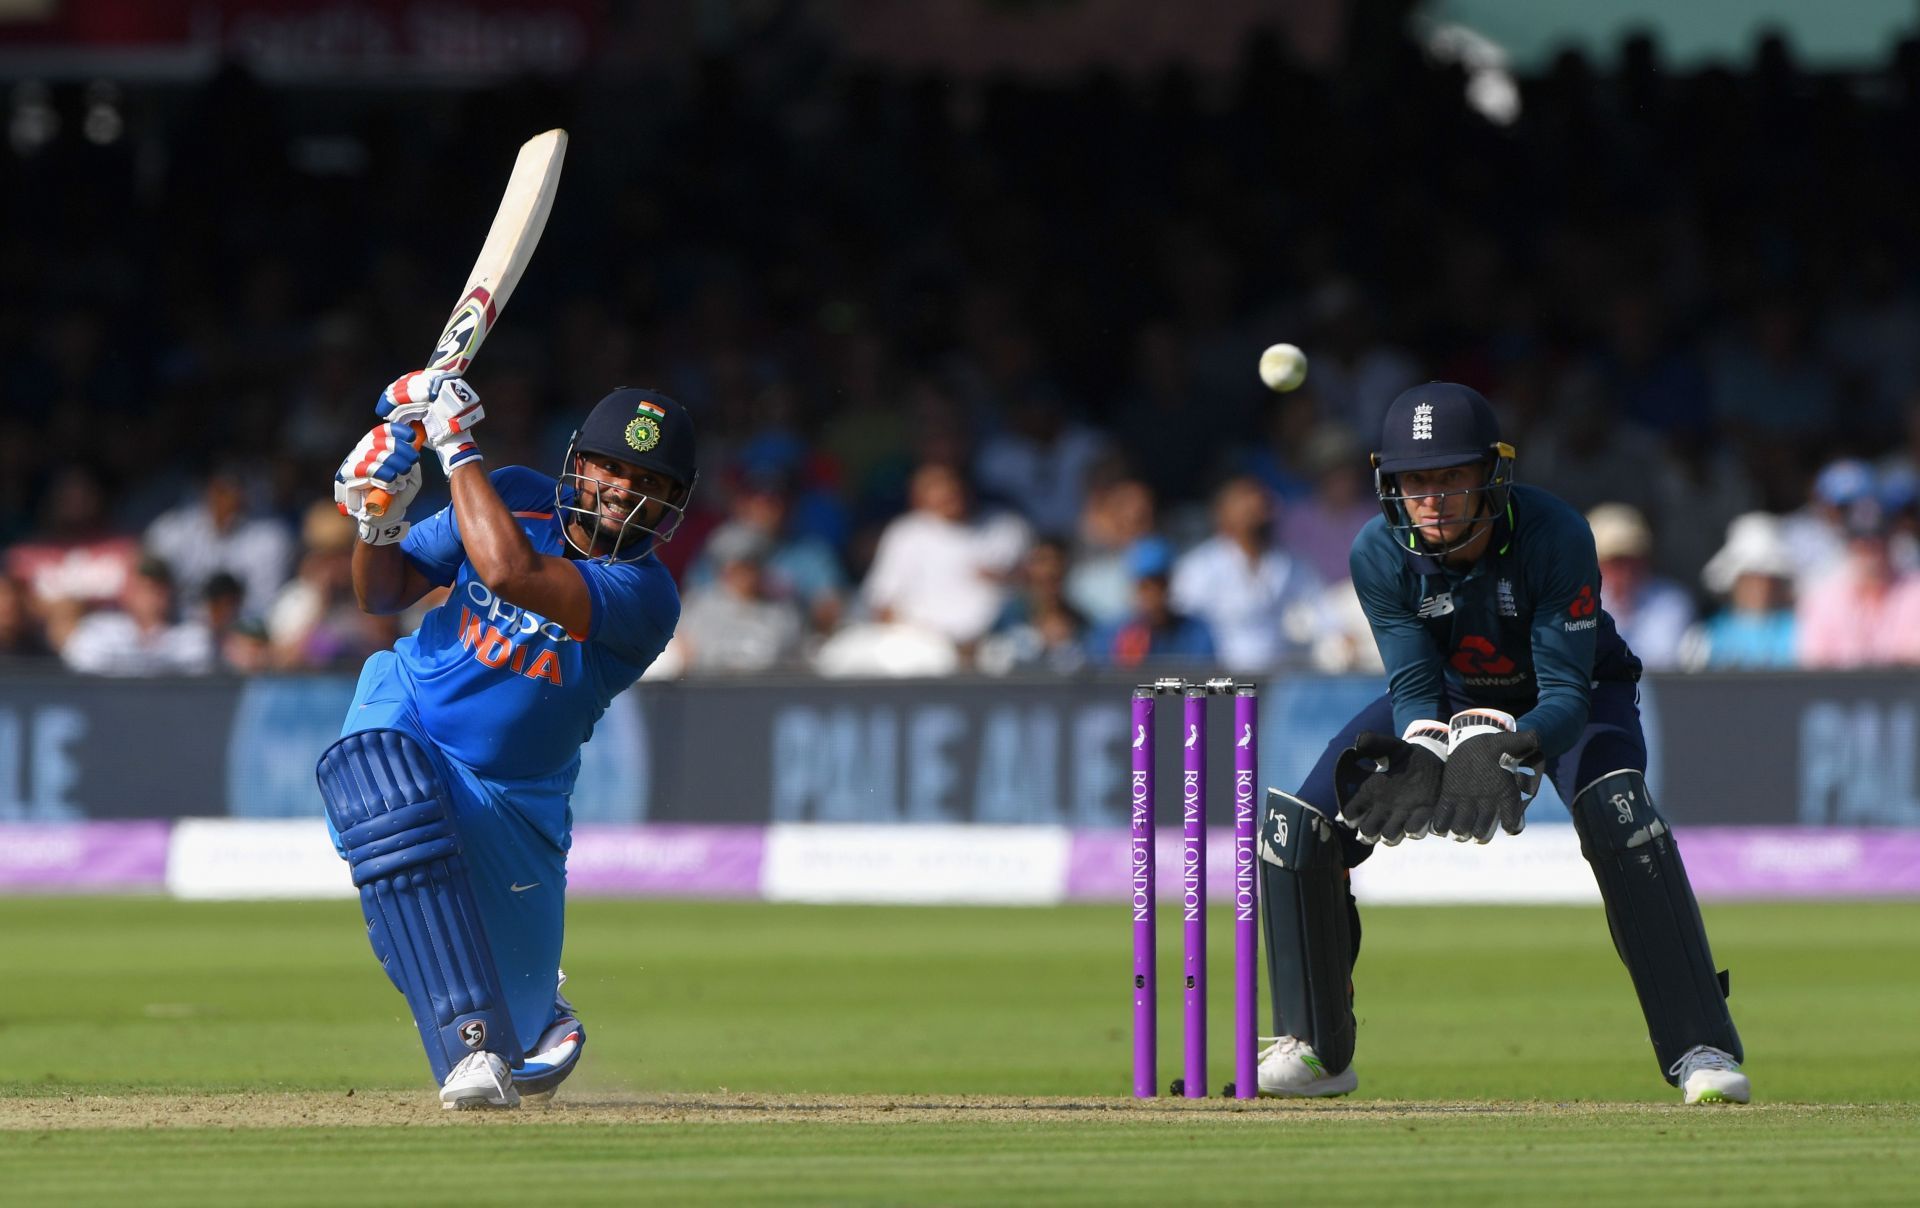 England v India - 2nd ODI: Royal London One-Day Series (Image: Getty)